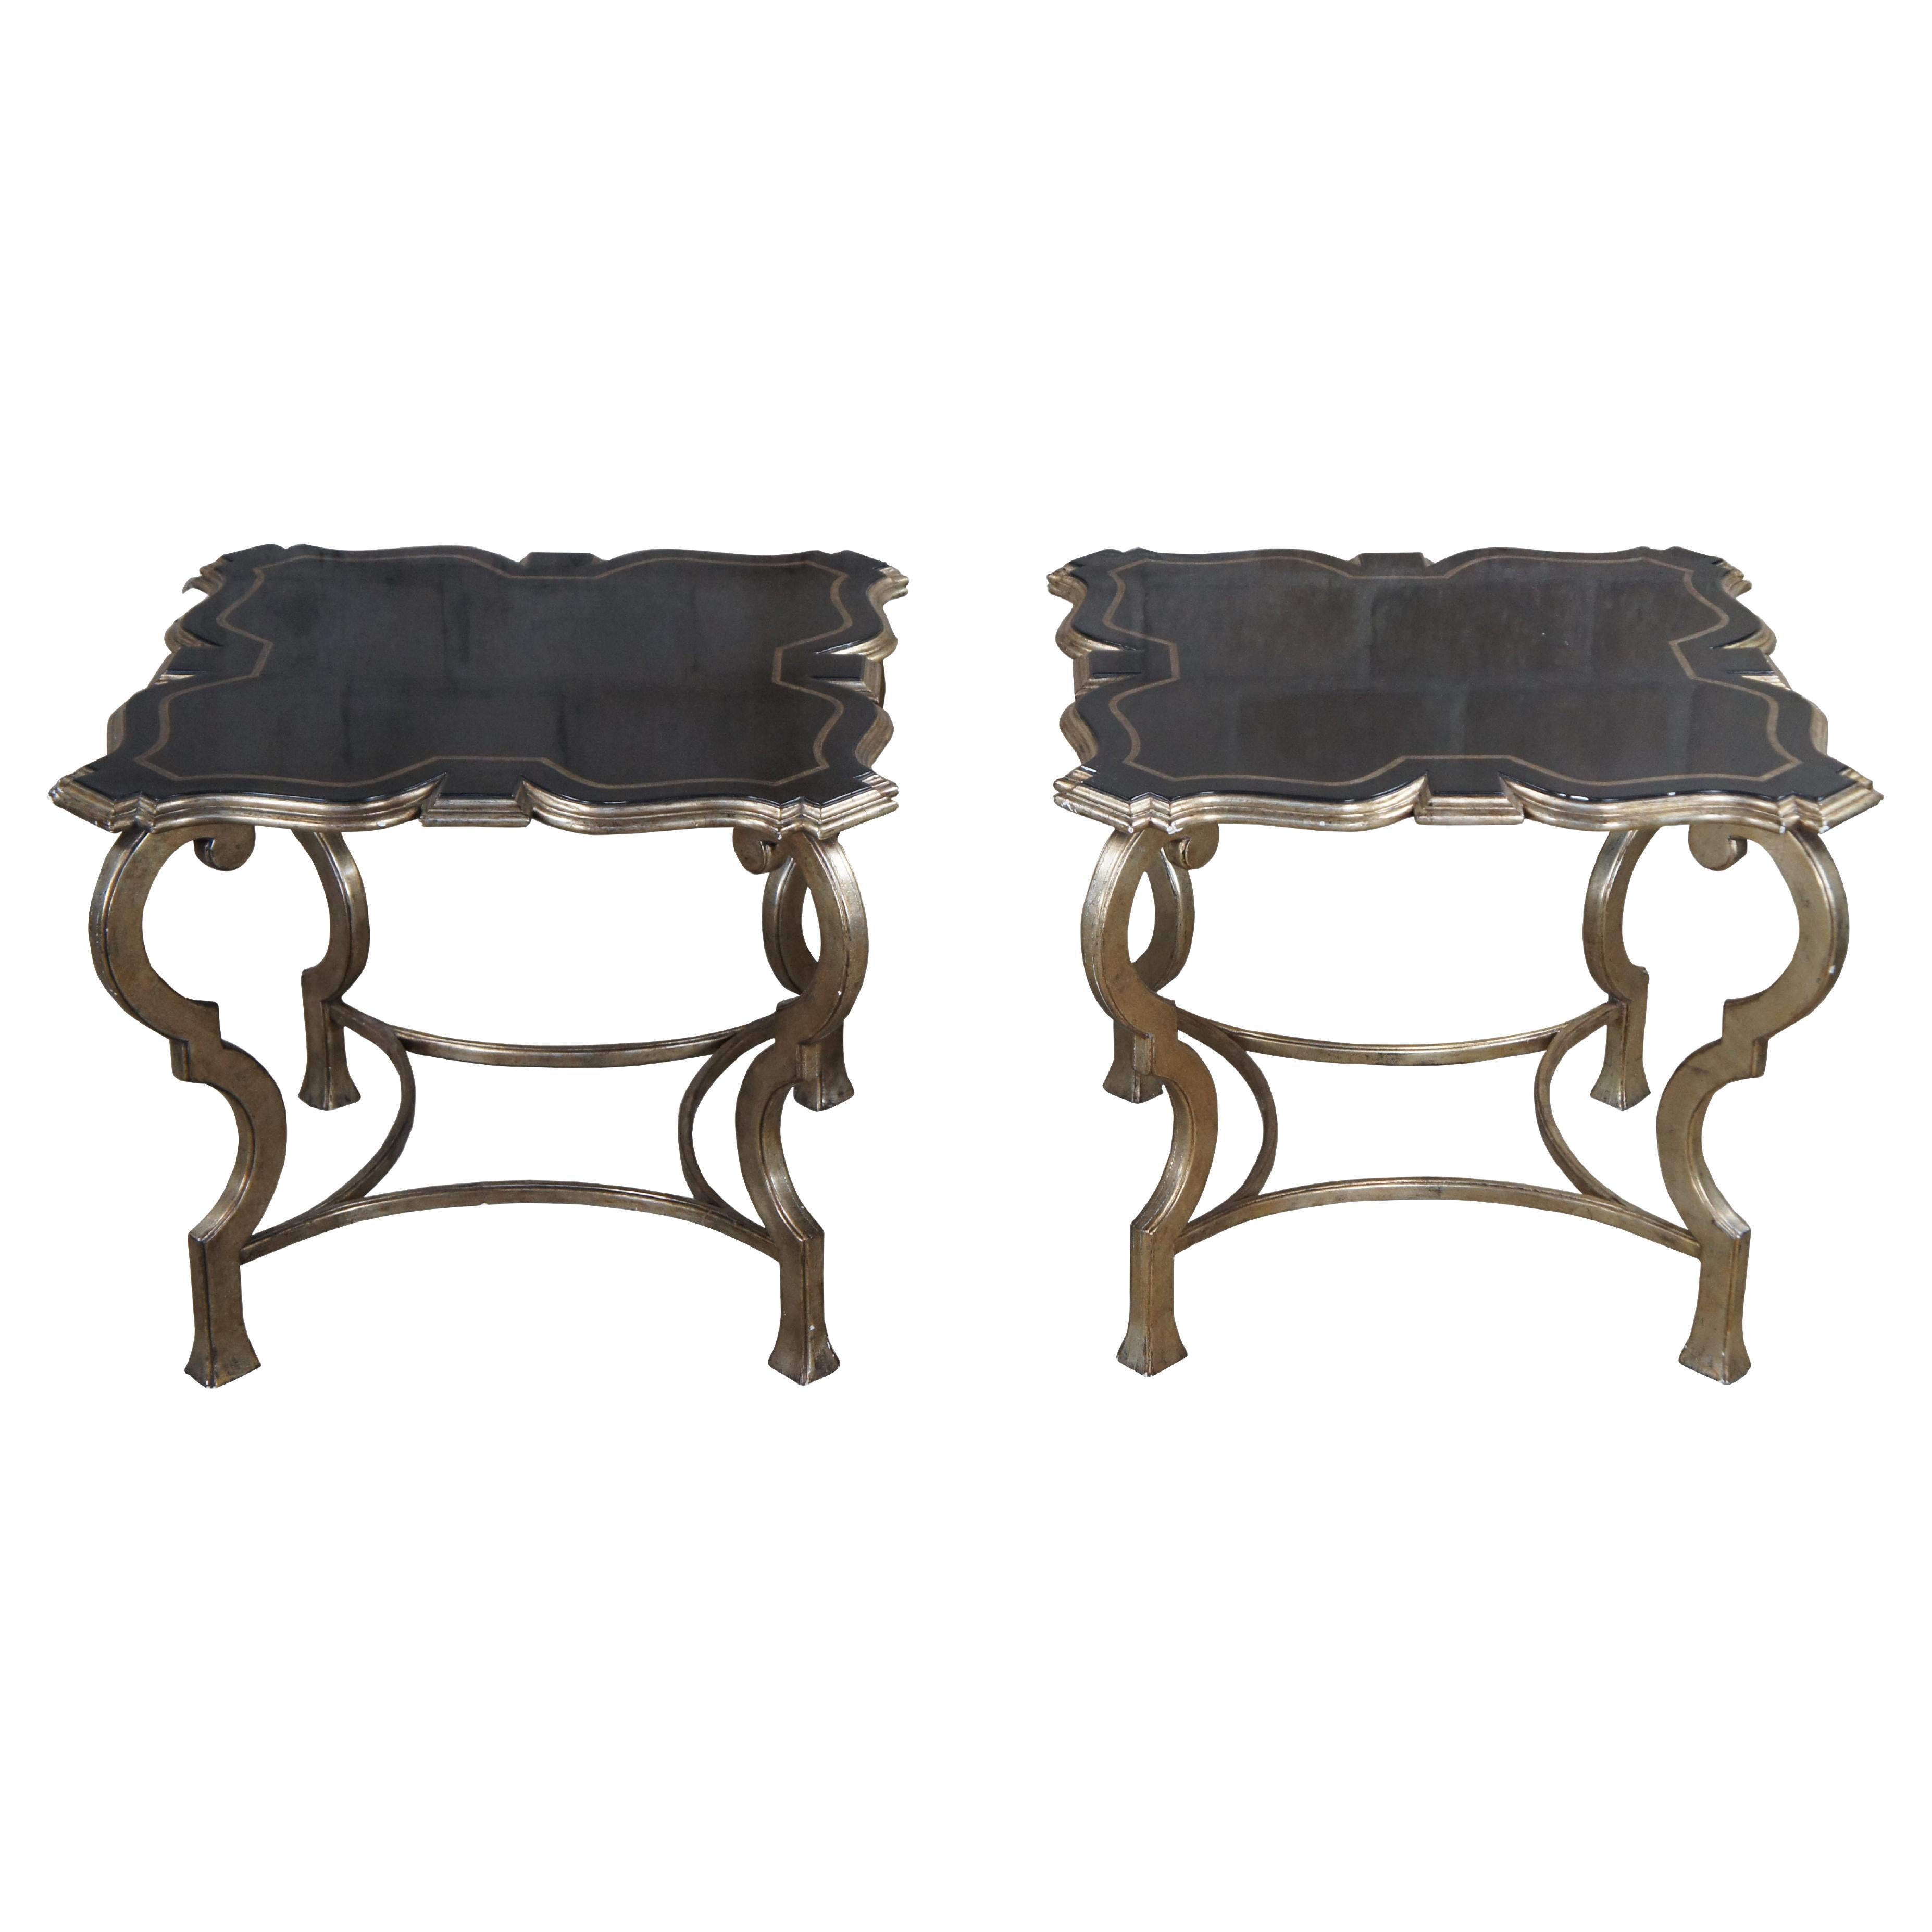 2 Contemporary Champagne & Black Crackled Modern Side End Tables Pair